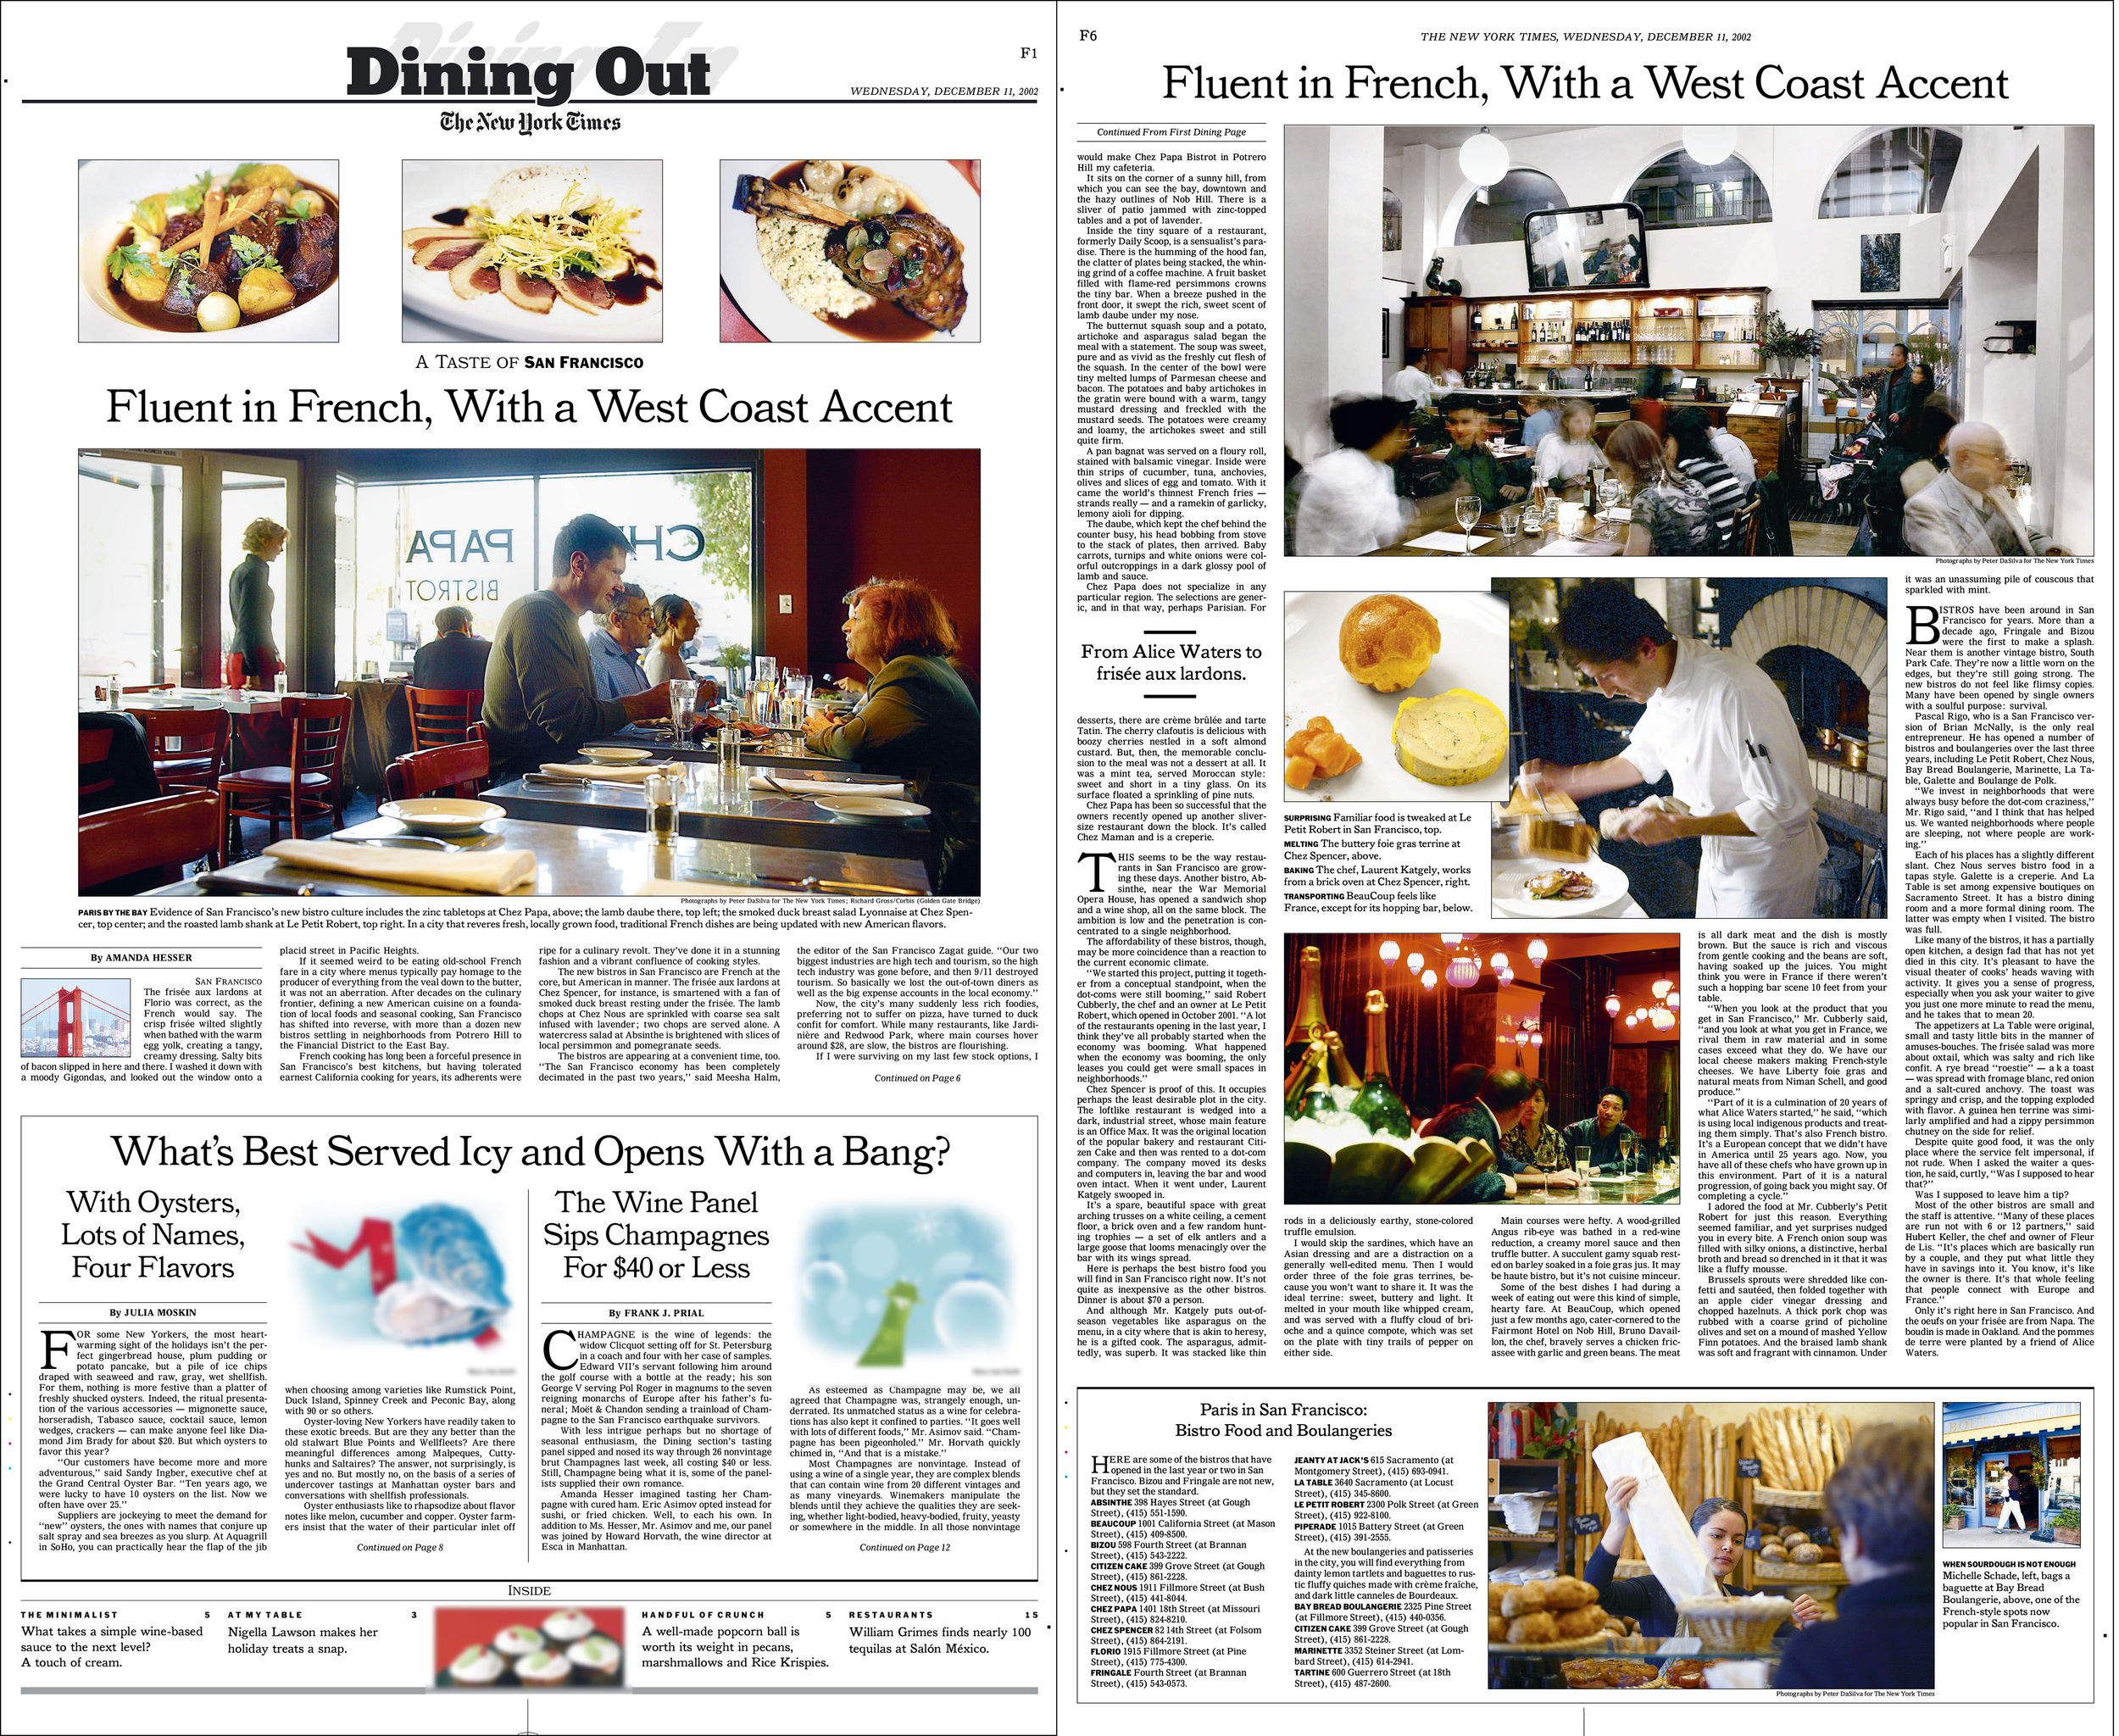   New York Times - Dining Out&nbsp;&nbsp;&nbsp;&nbsp; -cover/jump page  